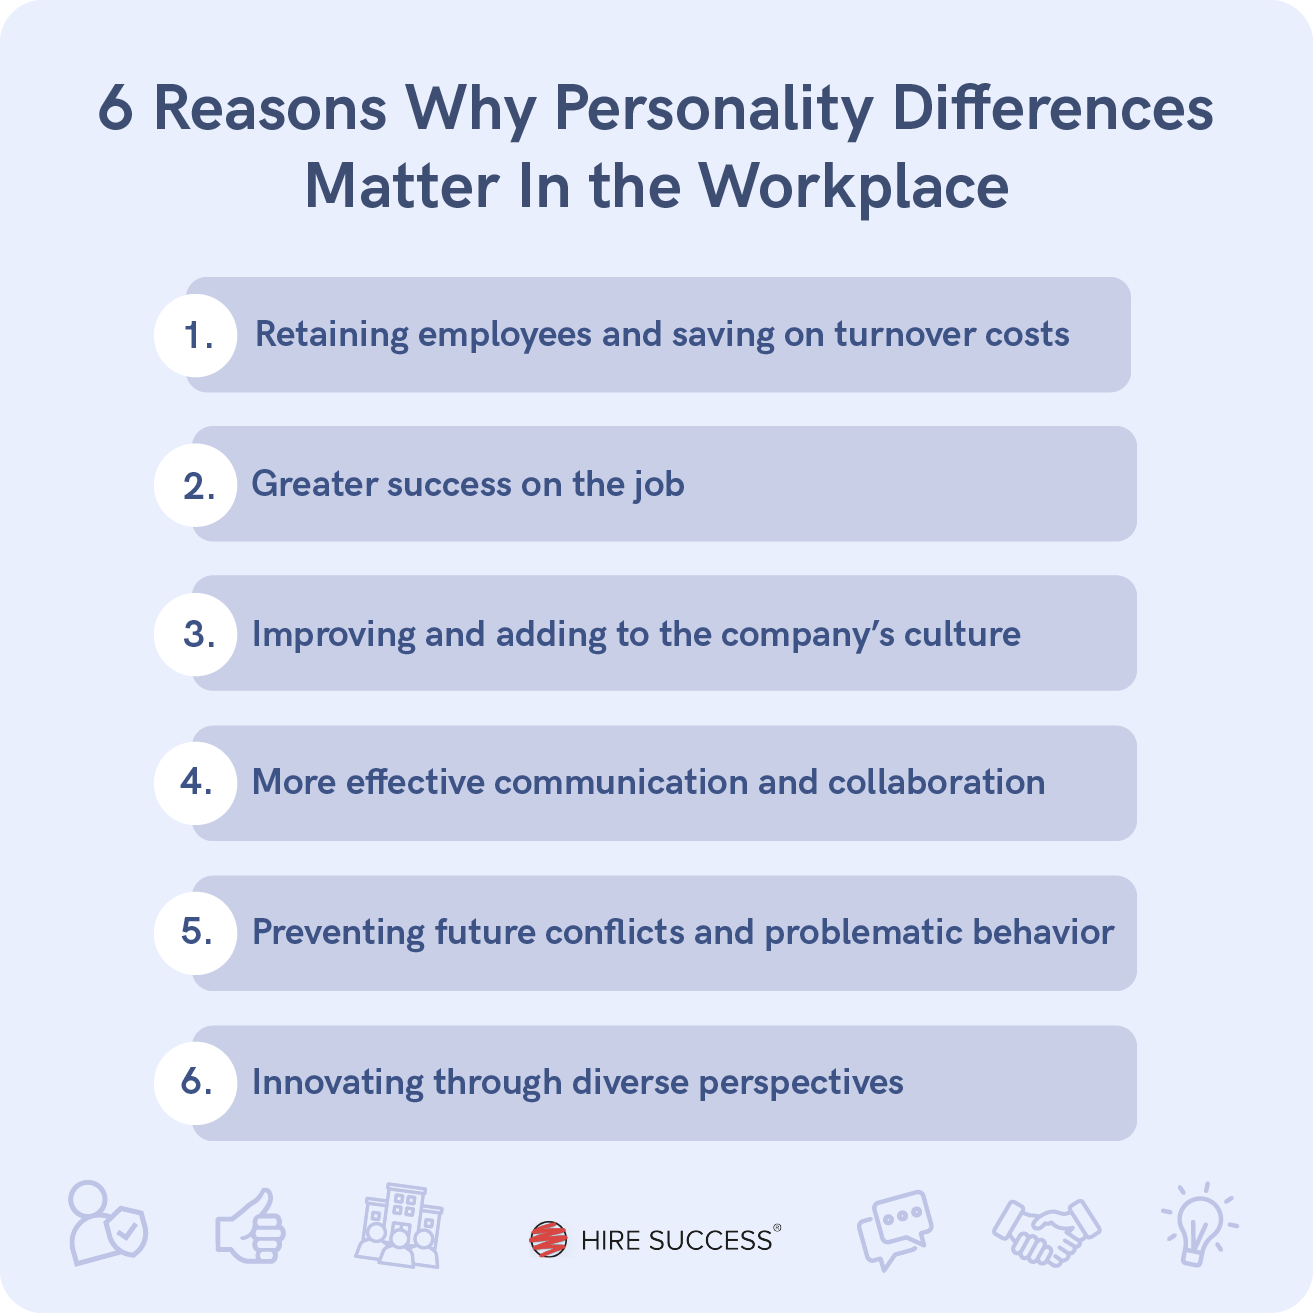 Benefits of different personalities in the workplace.